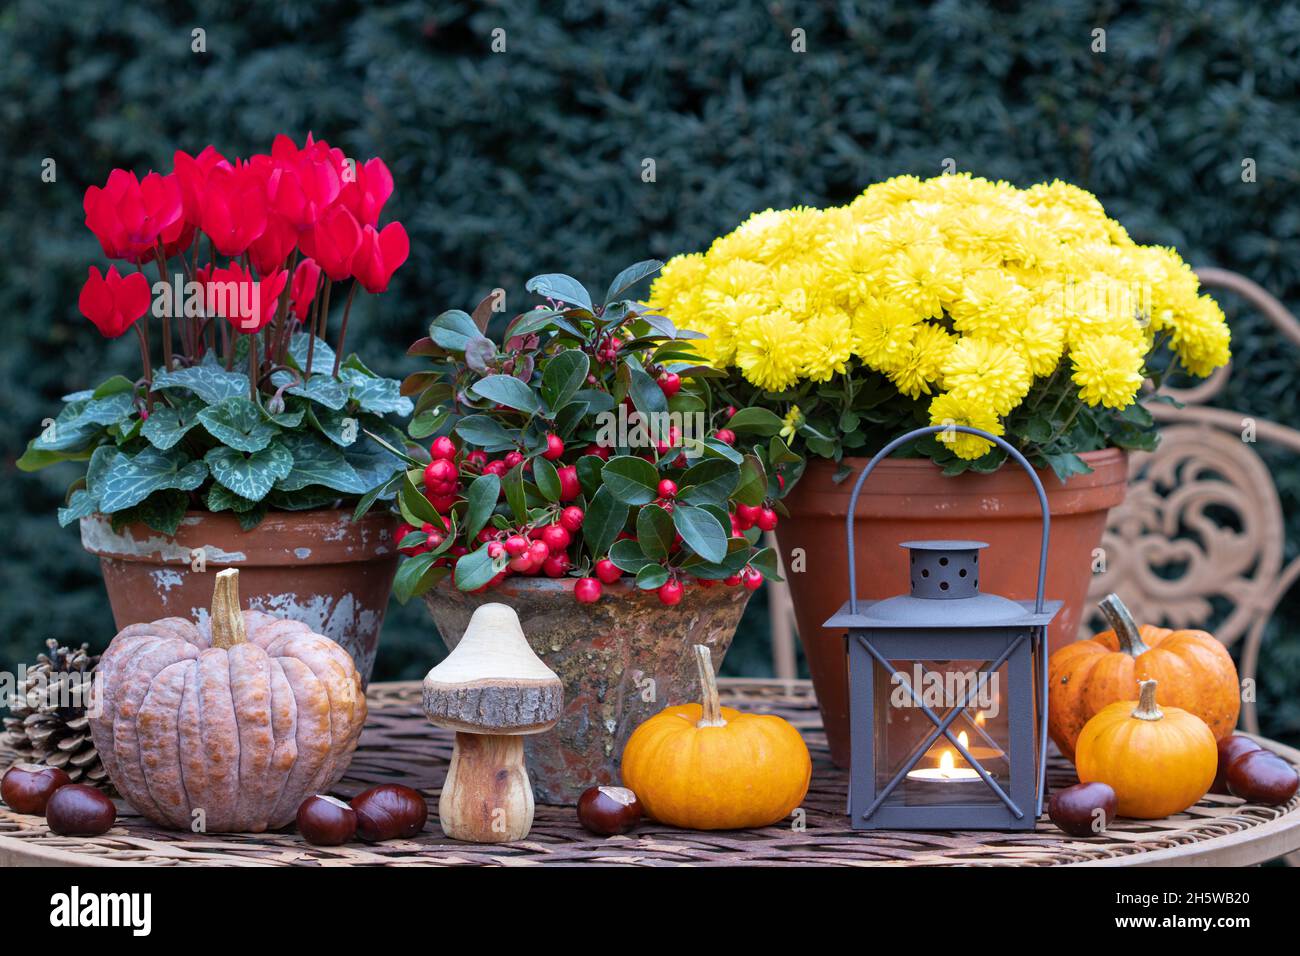 decoration with autumn flowers, pumpkins and lantern Stock Photo